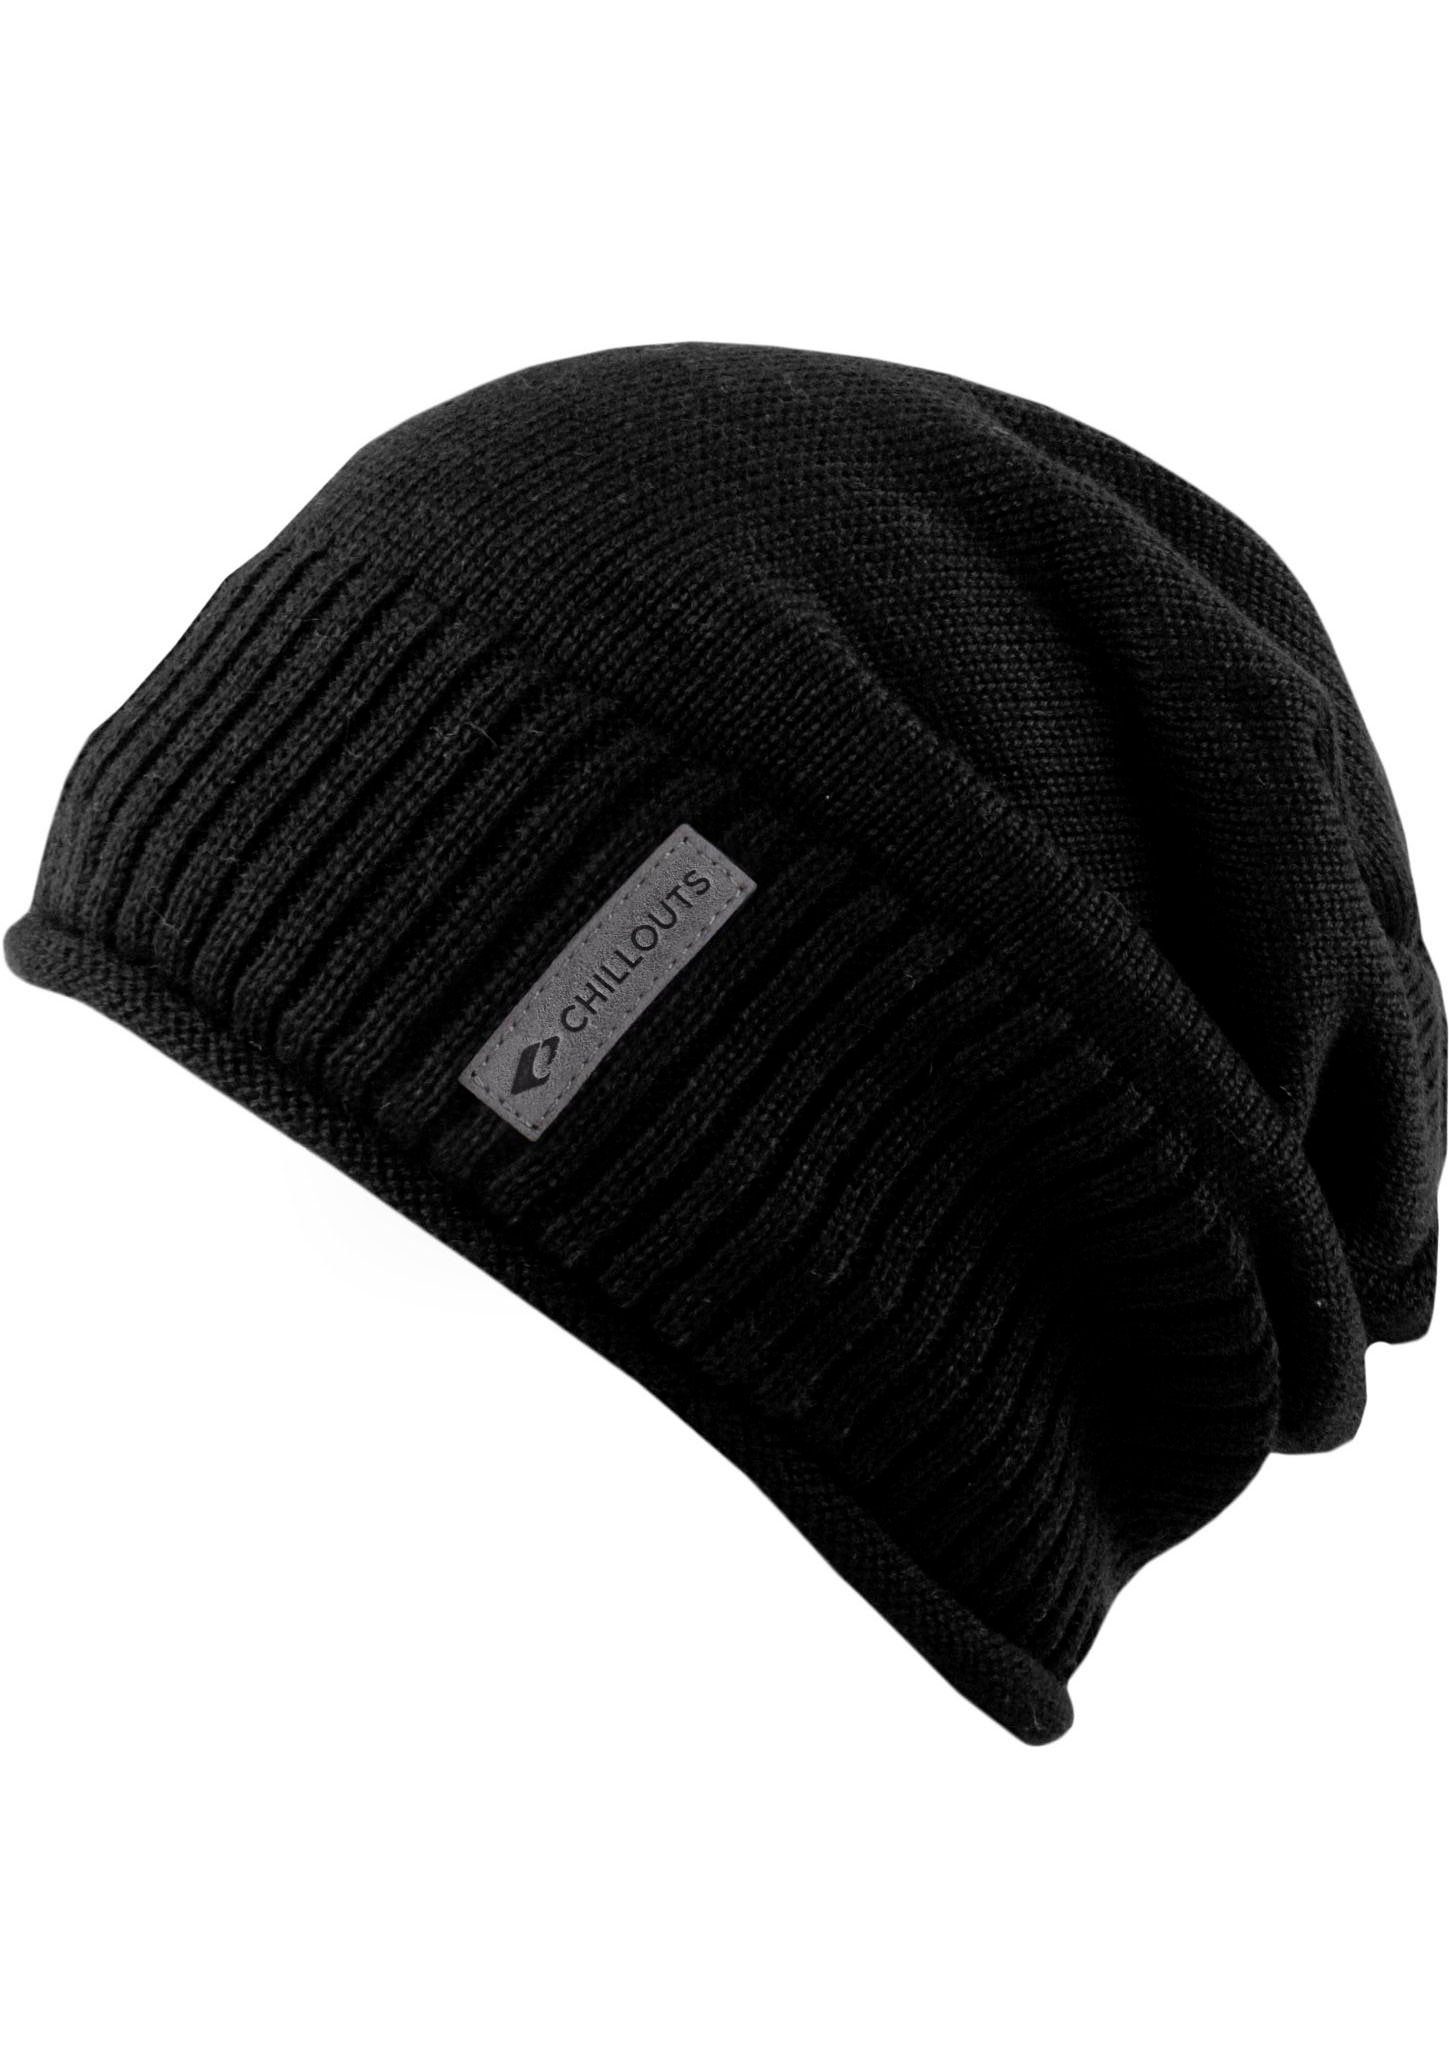 chillouts Beanie Etienne Hat black | Beanies